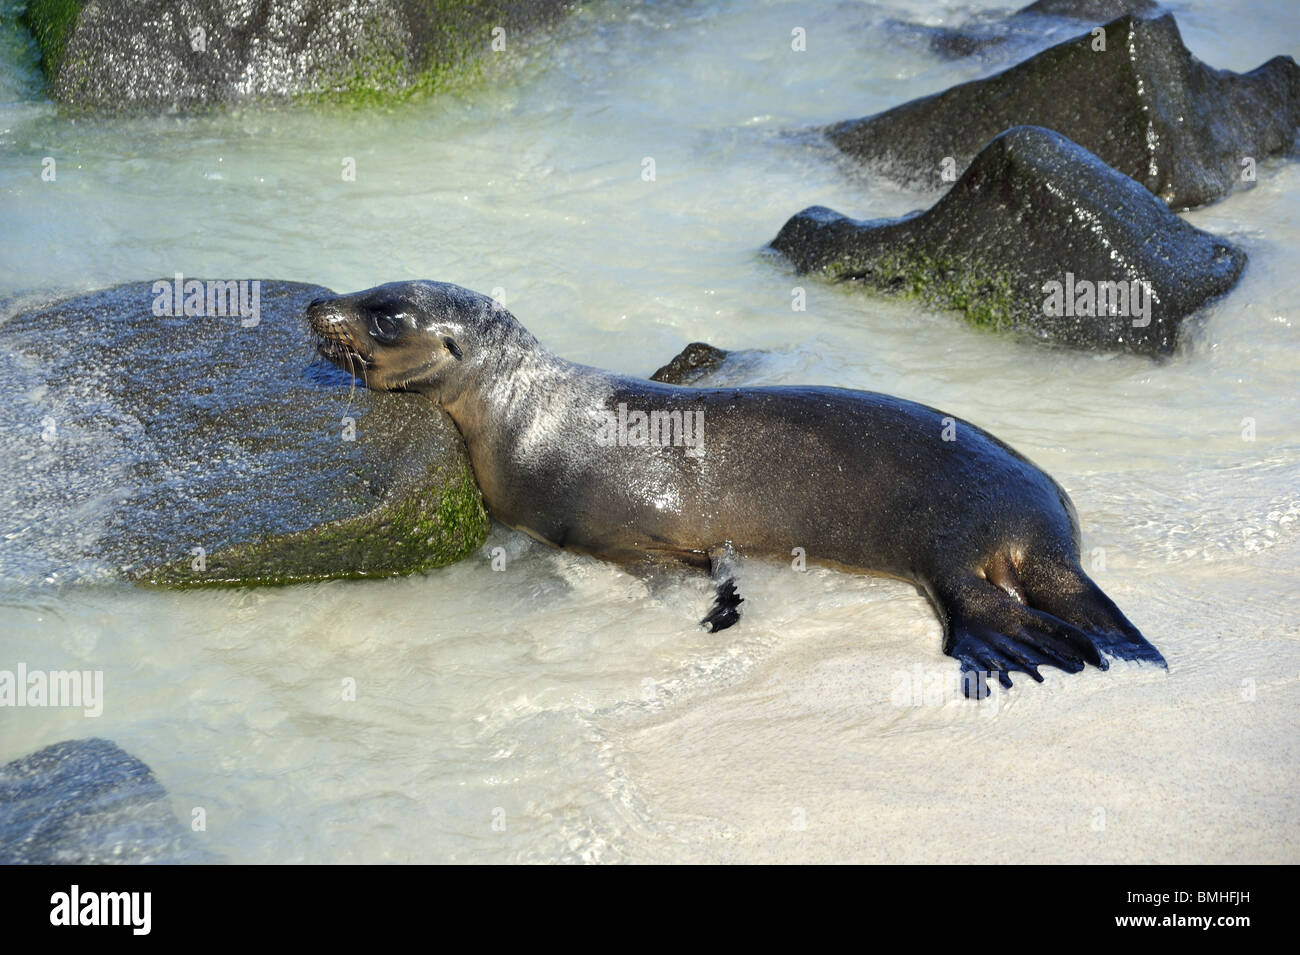 Sea Lion pup with head on rocks at waters edge Stock Photo